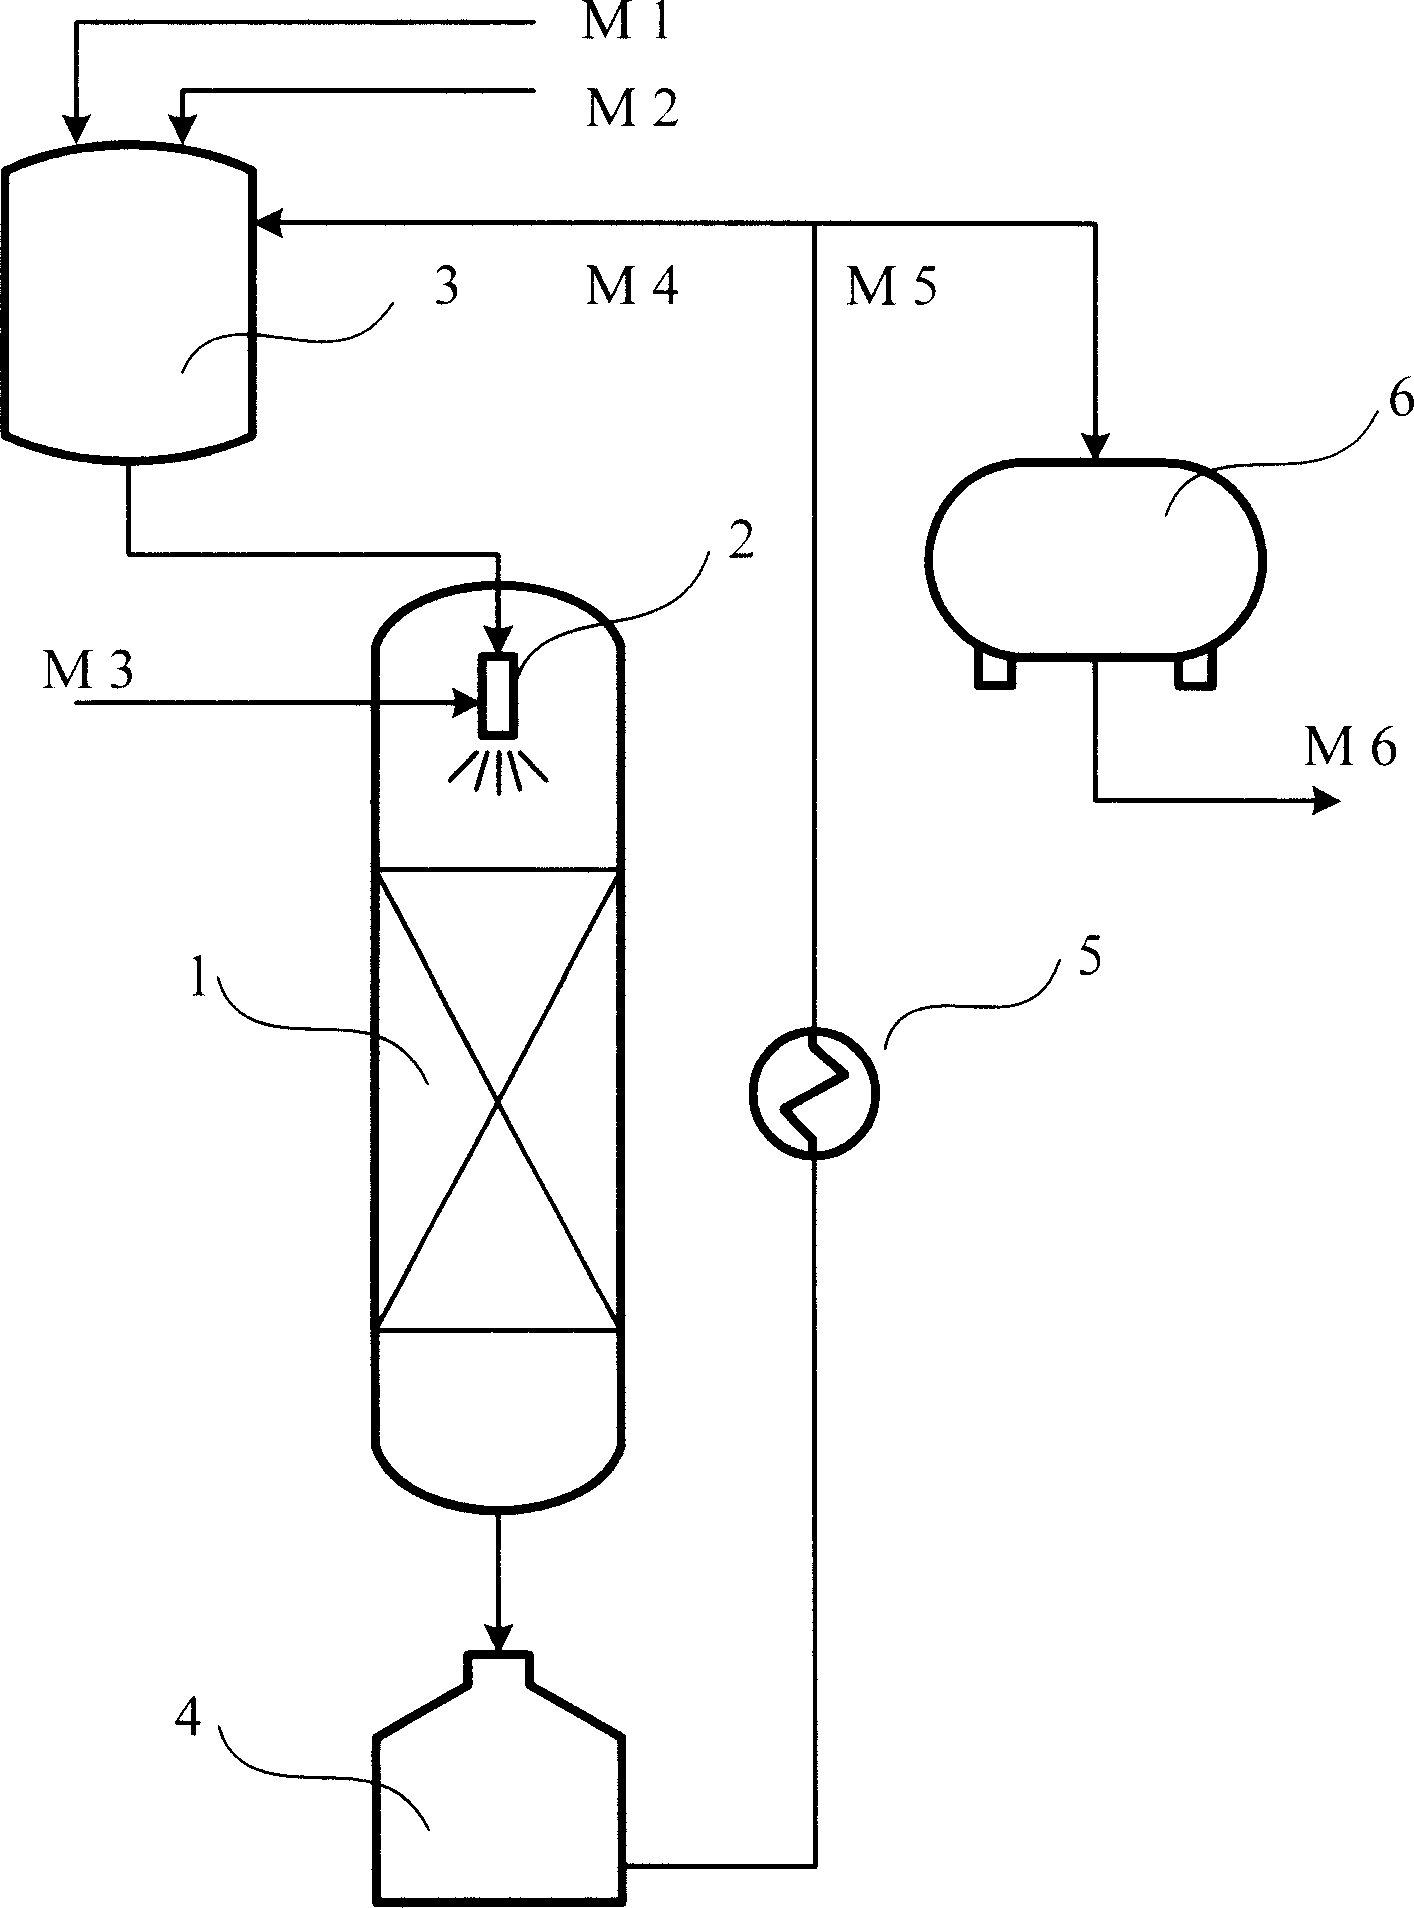 Method of preparing cyclopentene by continuous hydrogenation of cyclopentadiene